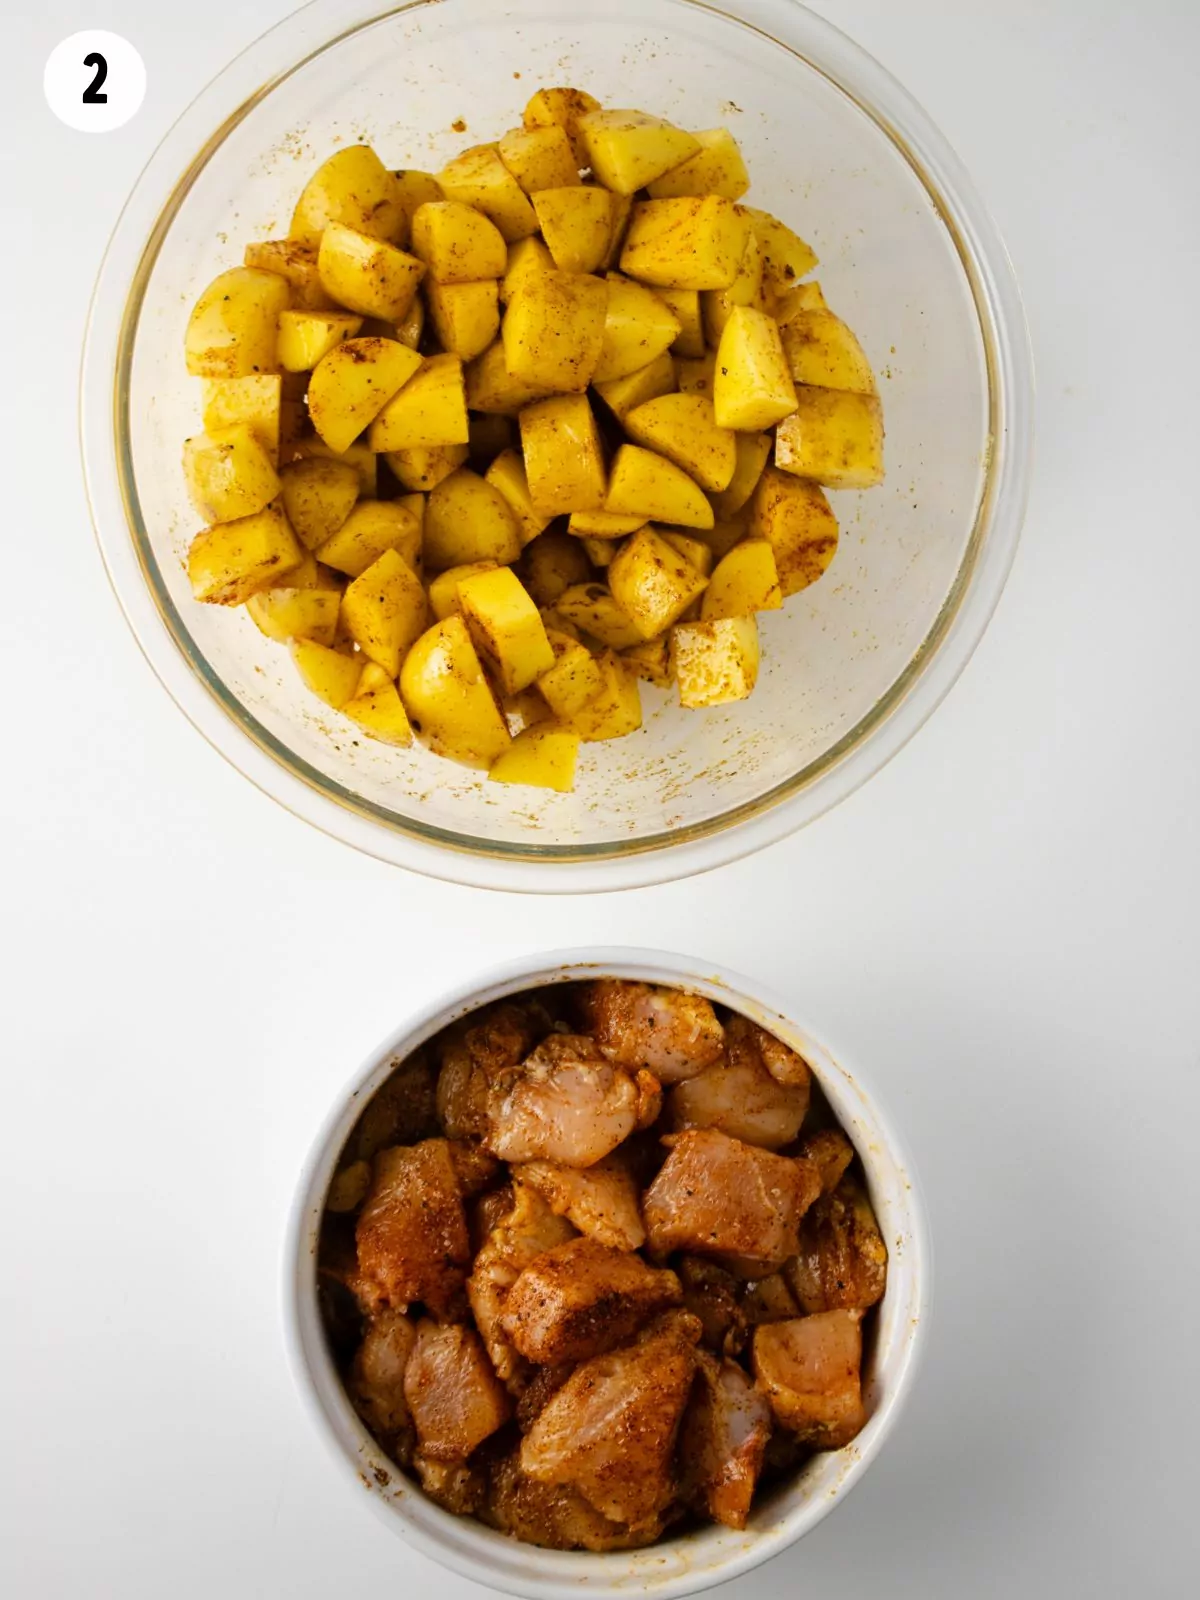 seasoned chicken and potatoes in bowls.